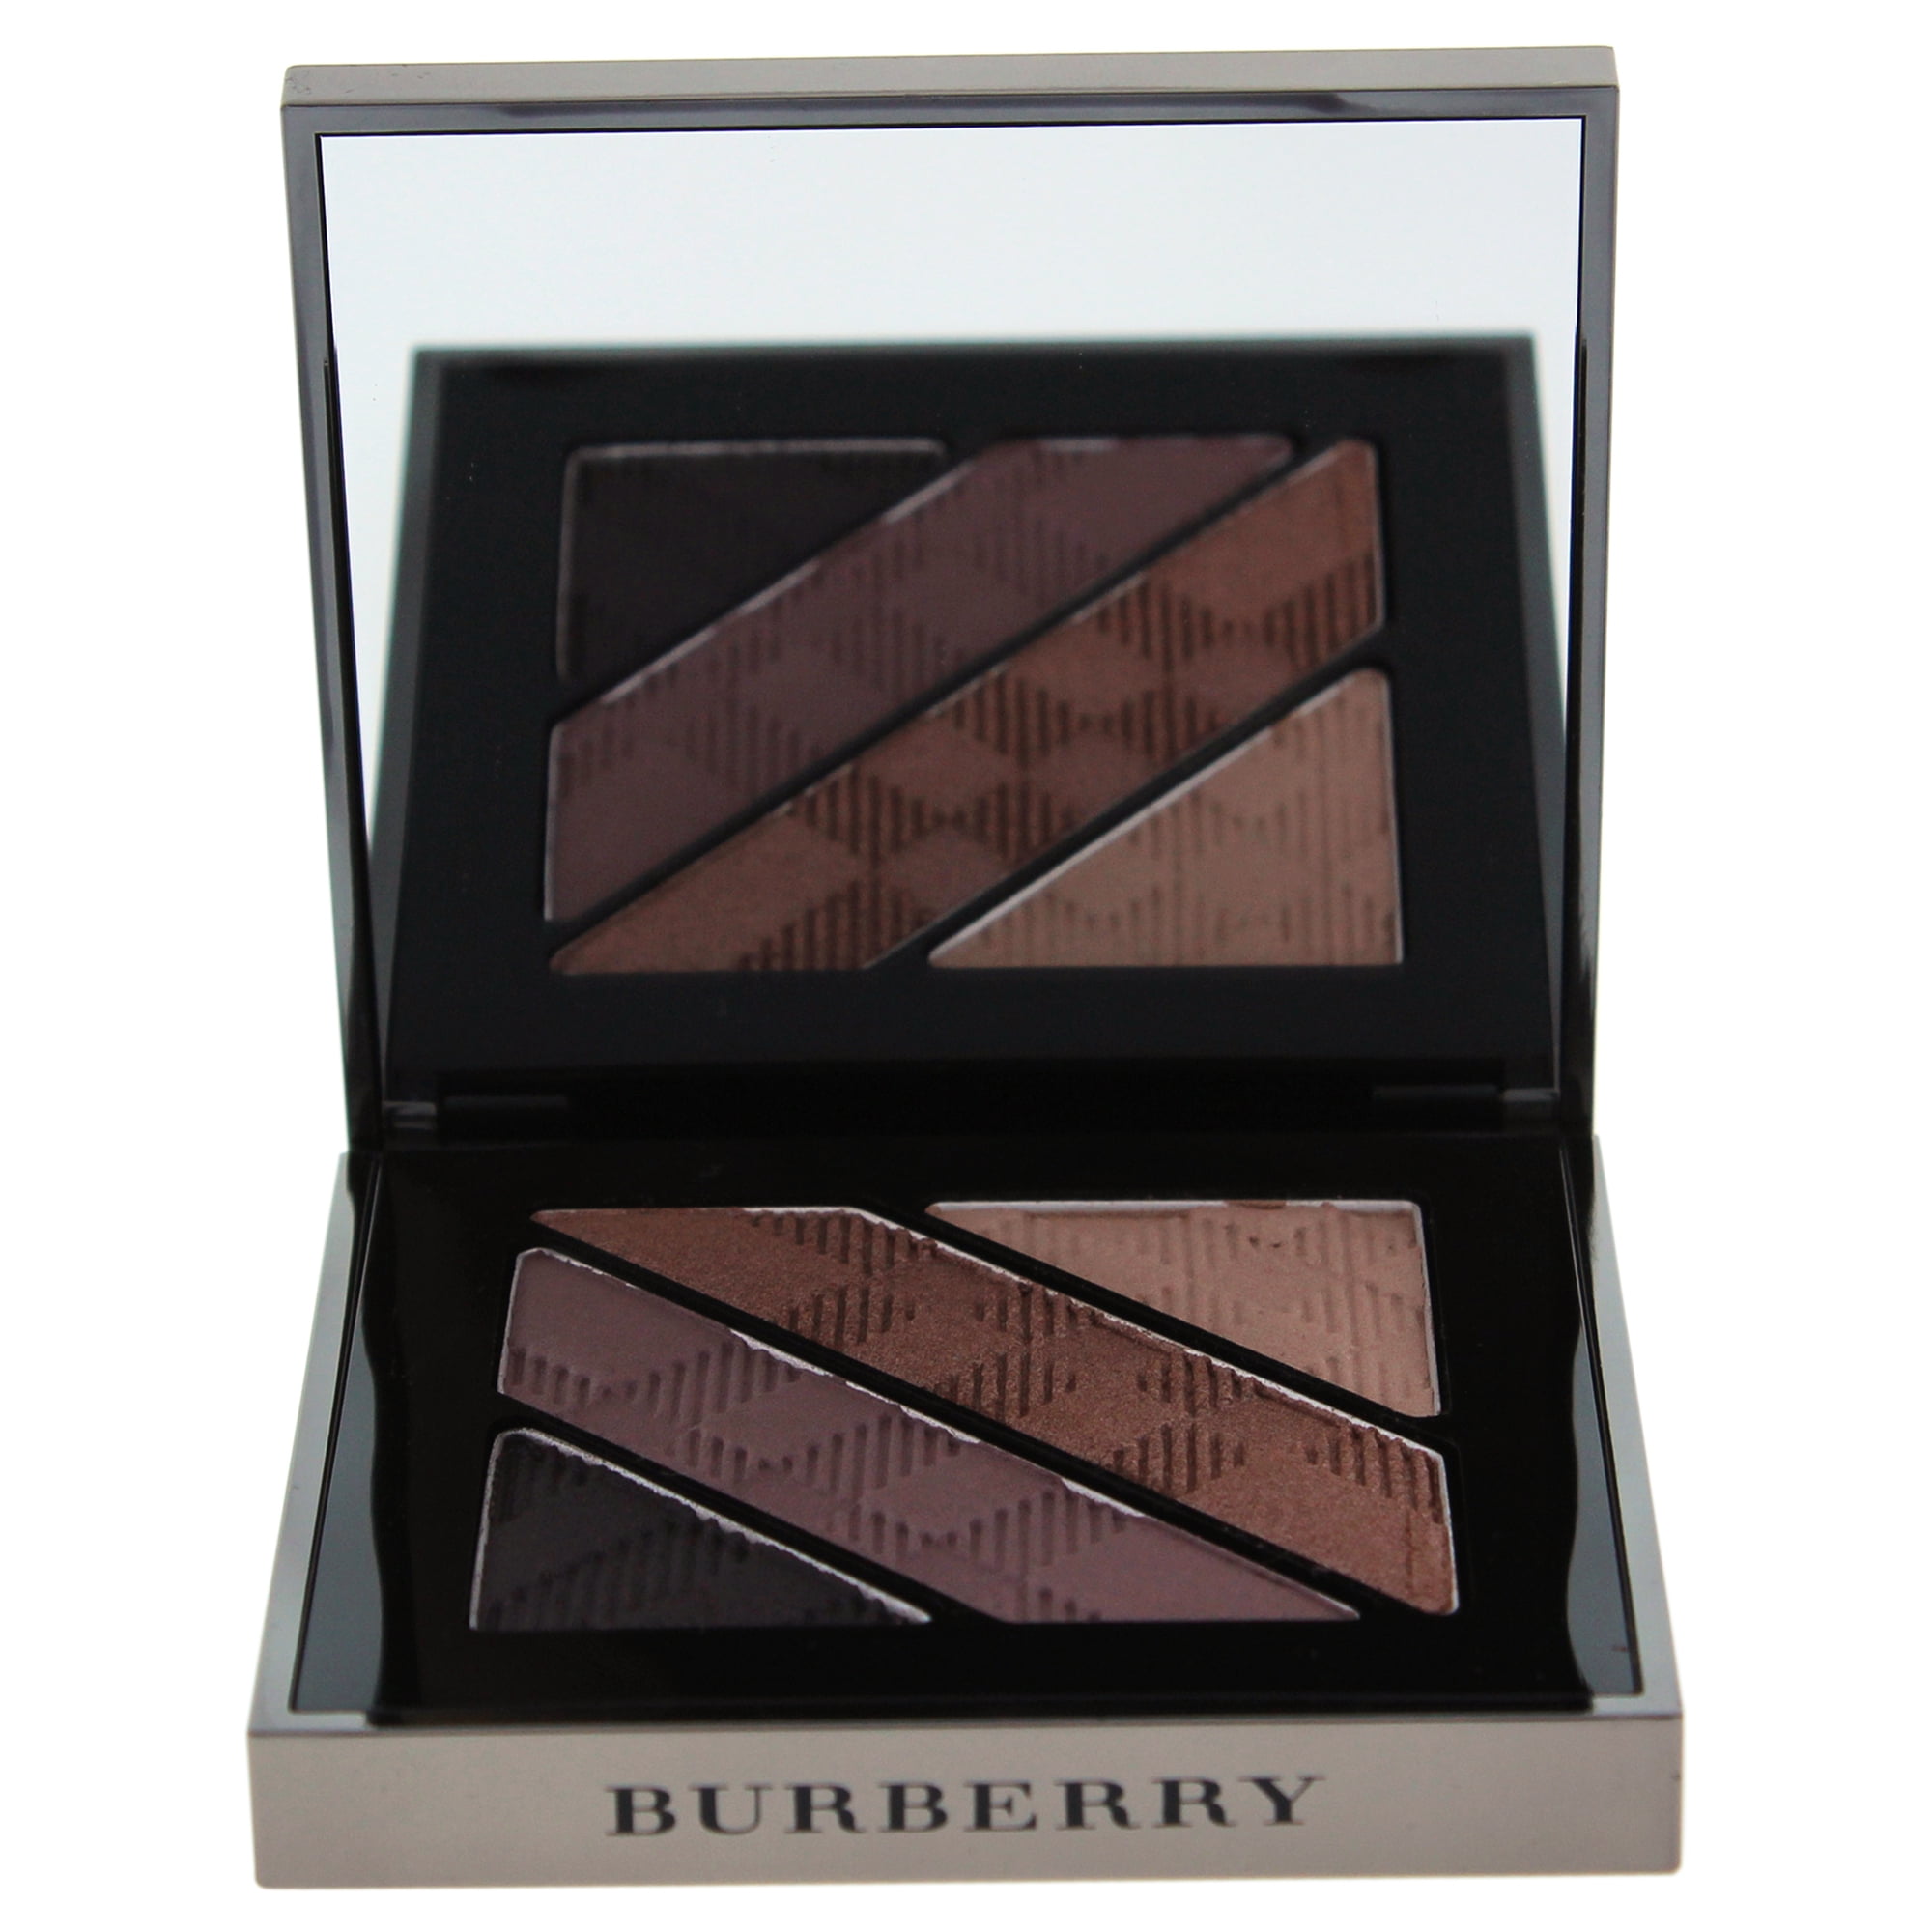 Burberry Cashmere Compact - # 31 Rosy Nude 0.4 oz Compact 